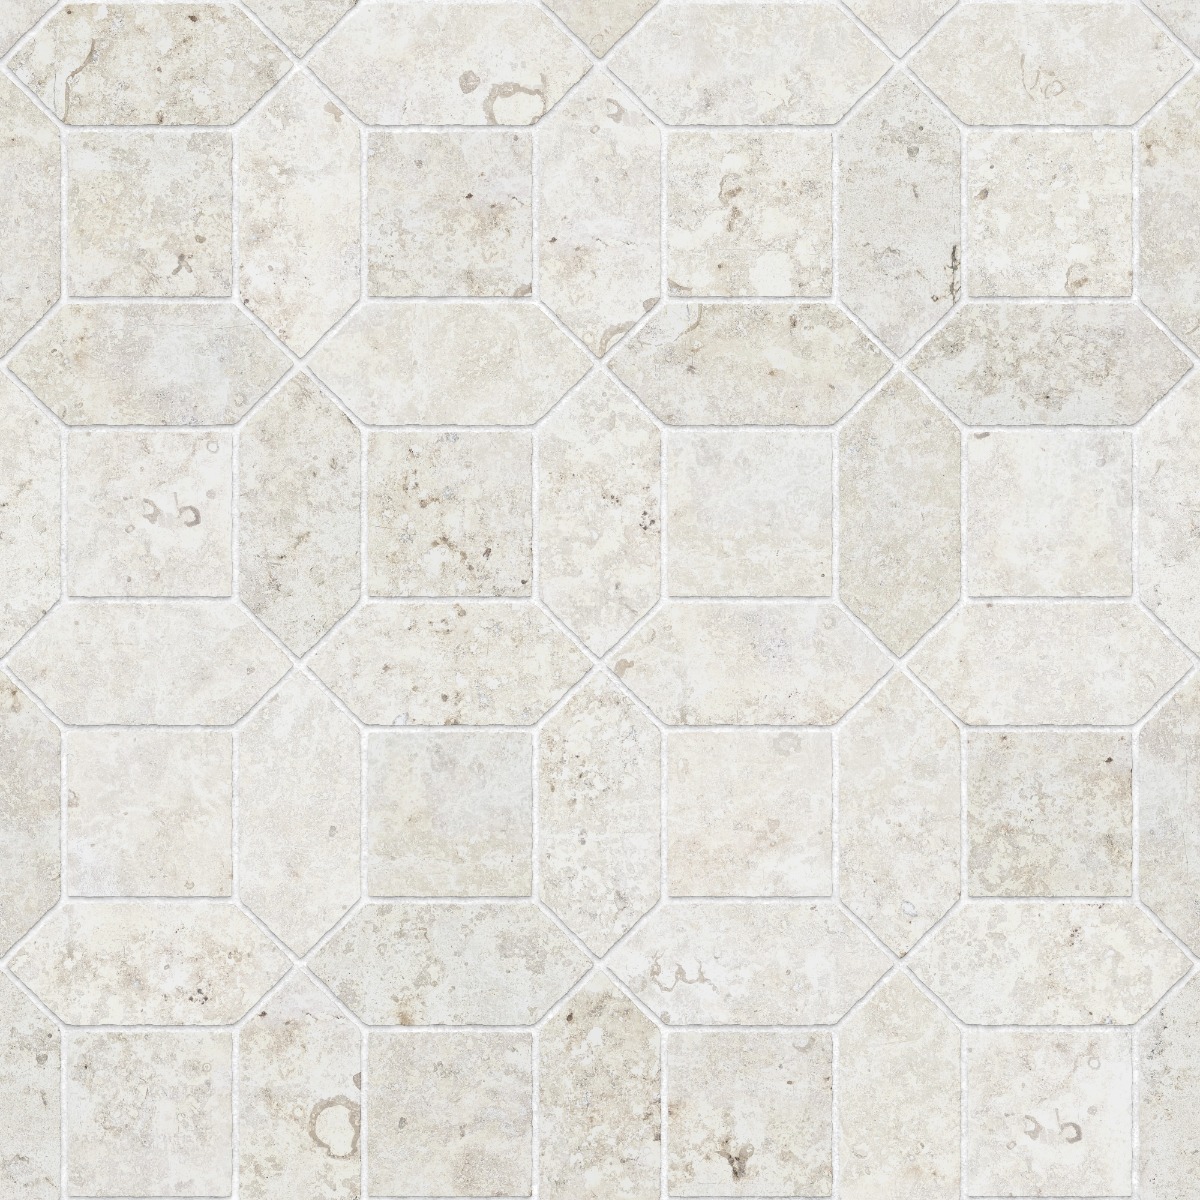 A seamless stone texture with limestone blocks arranged in a Picket and Square pattern